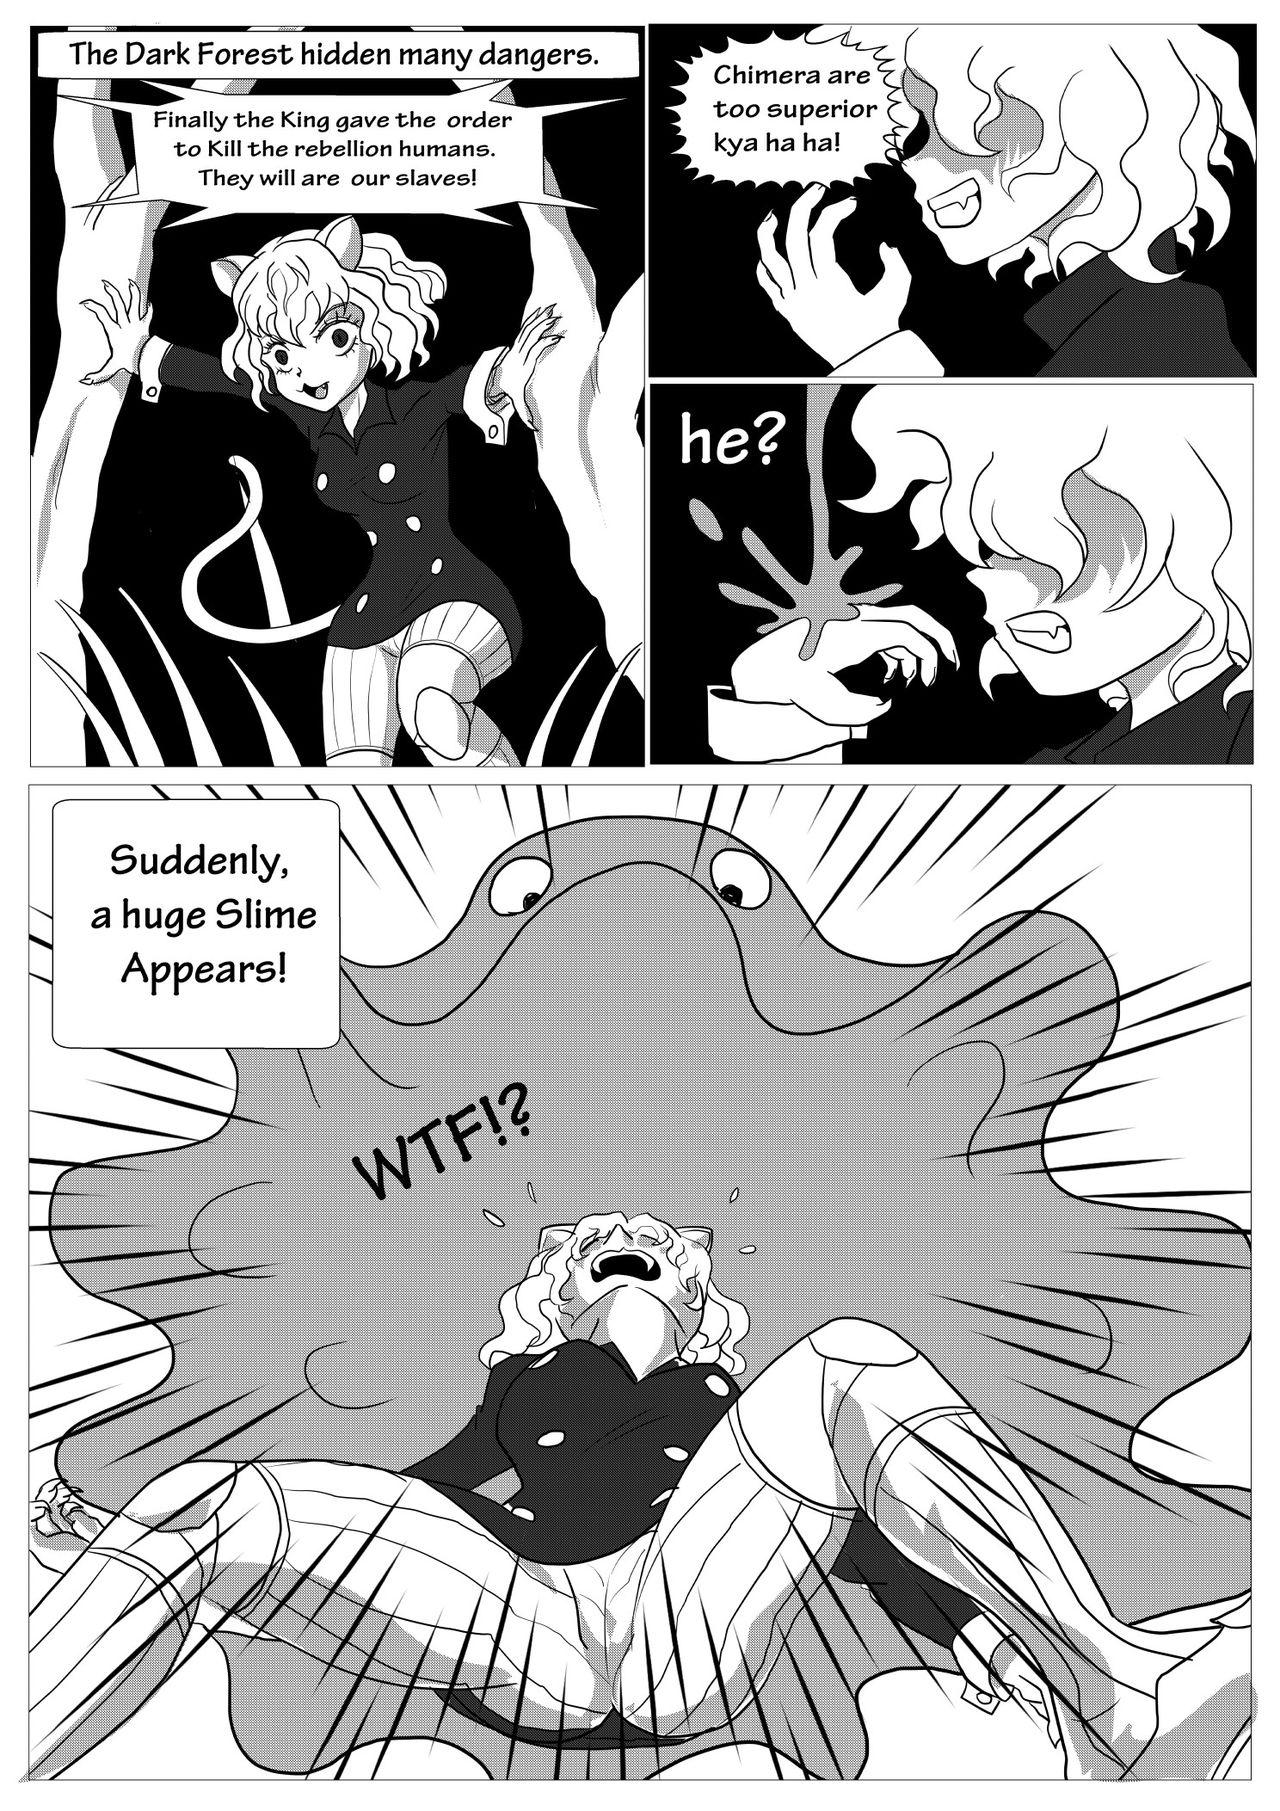 The decay of Neferpitou 0